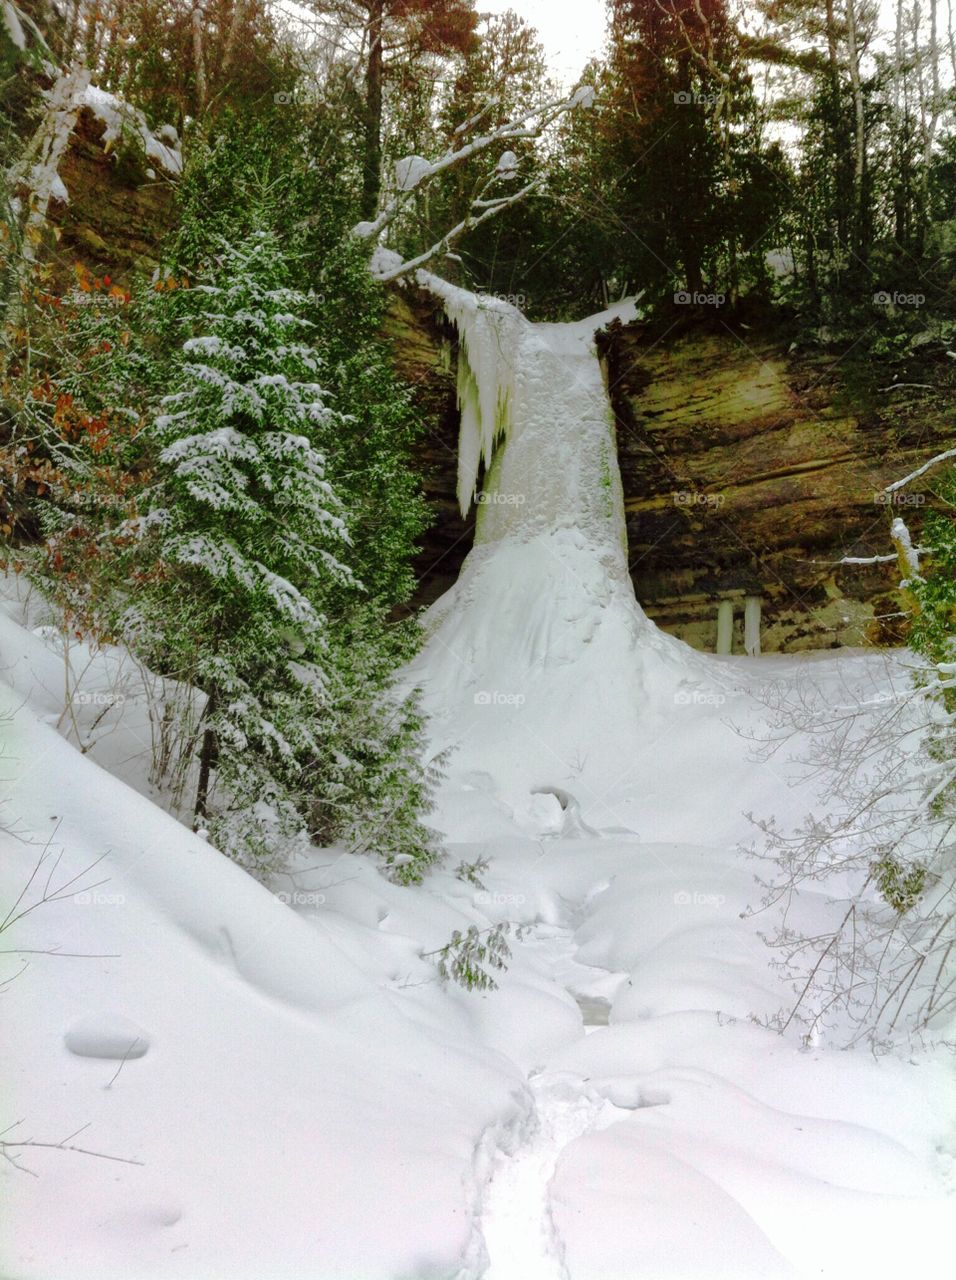 Frozen waterfall on a hike through a trail in the woods in northern Michigan